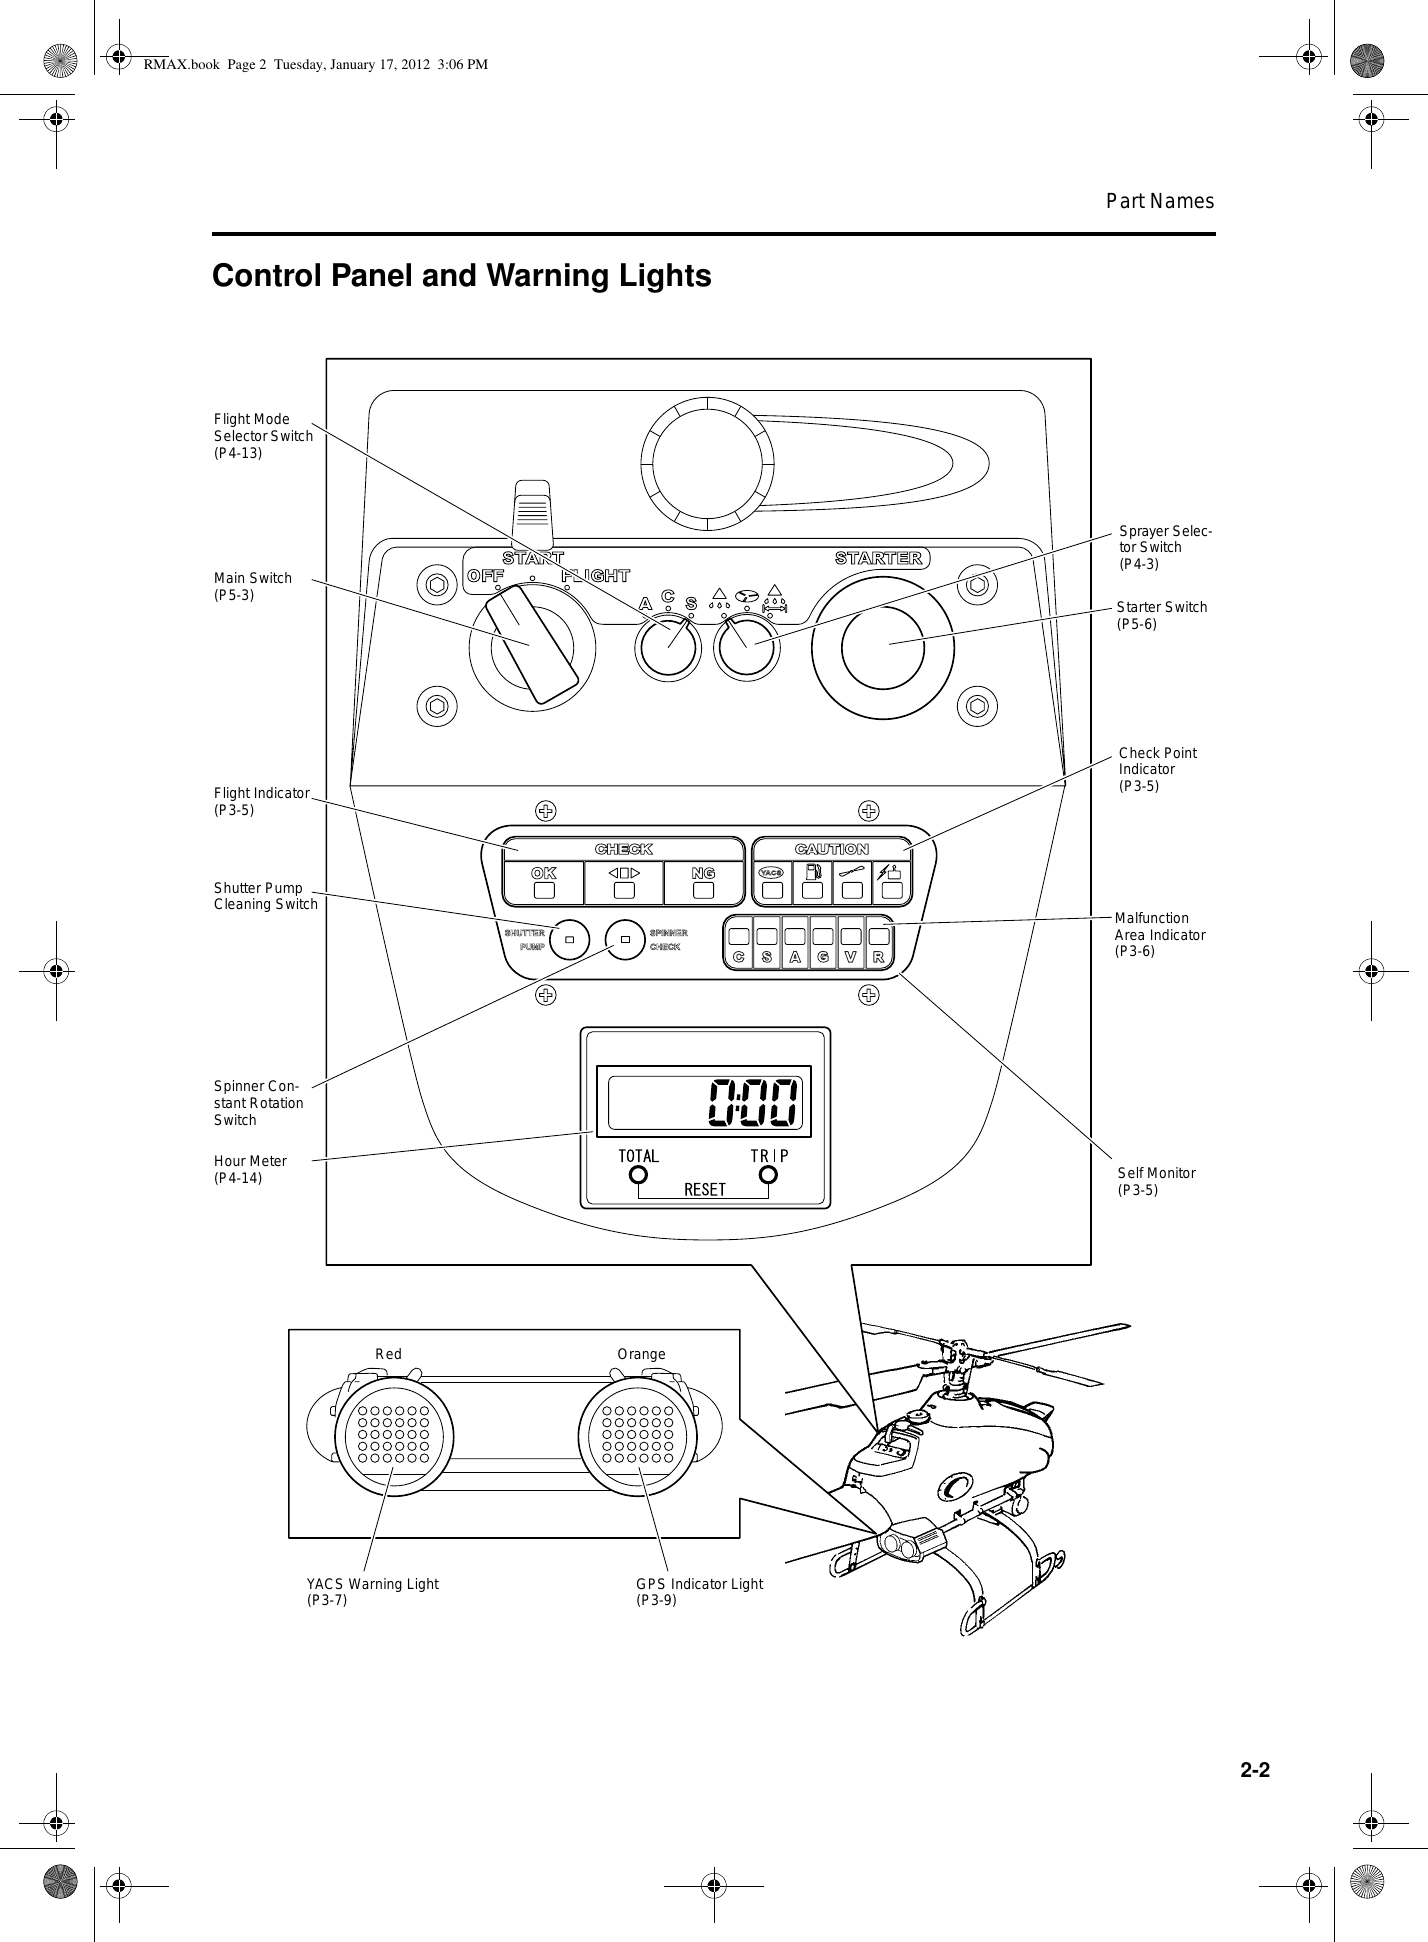 Part Names2-2Control Panel and Warning LightsFlight Mode Selector Switch (P4-13)Main Switch (P5-3)Flight Indicator(P3-5)Shutter Pump Cleaning SwitchSpinner Con-stant Rotation Switch Starter Switch(P5-6)Check Point Indicator(P3-5)Malfunction Area Indicator(P3-6)Hour Meter(P4-14)Red OrangeYACS Warning Light(P3-7) GPS Indicator Light(P3-9)Self Monitor(P3-5)Sprayer Selec-tor Switch(P4-3)RMAX.book  Page 2  Tuesday, January 17, 2012  3:06 PM